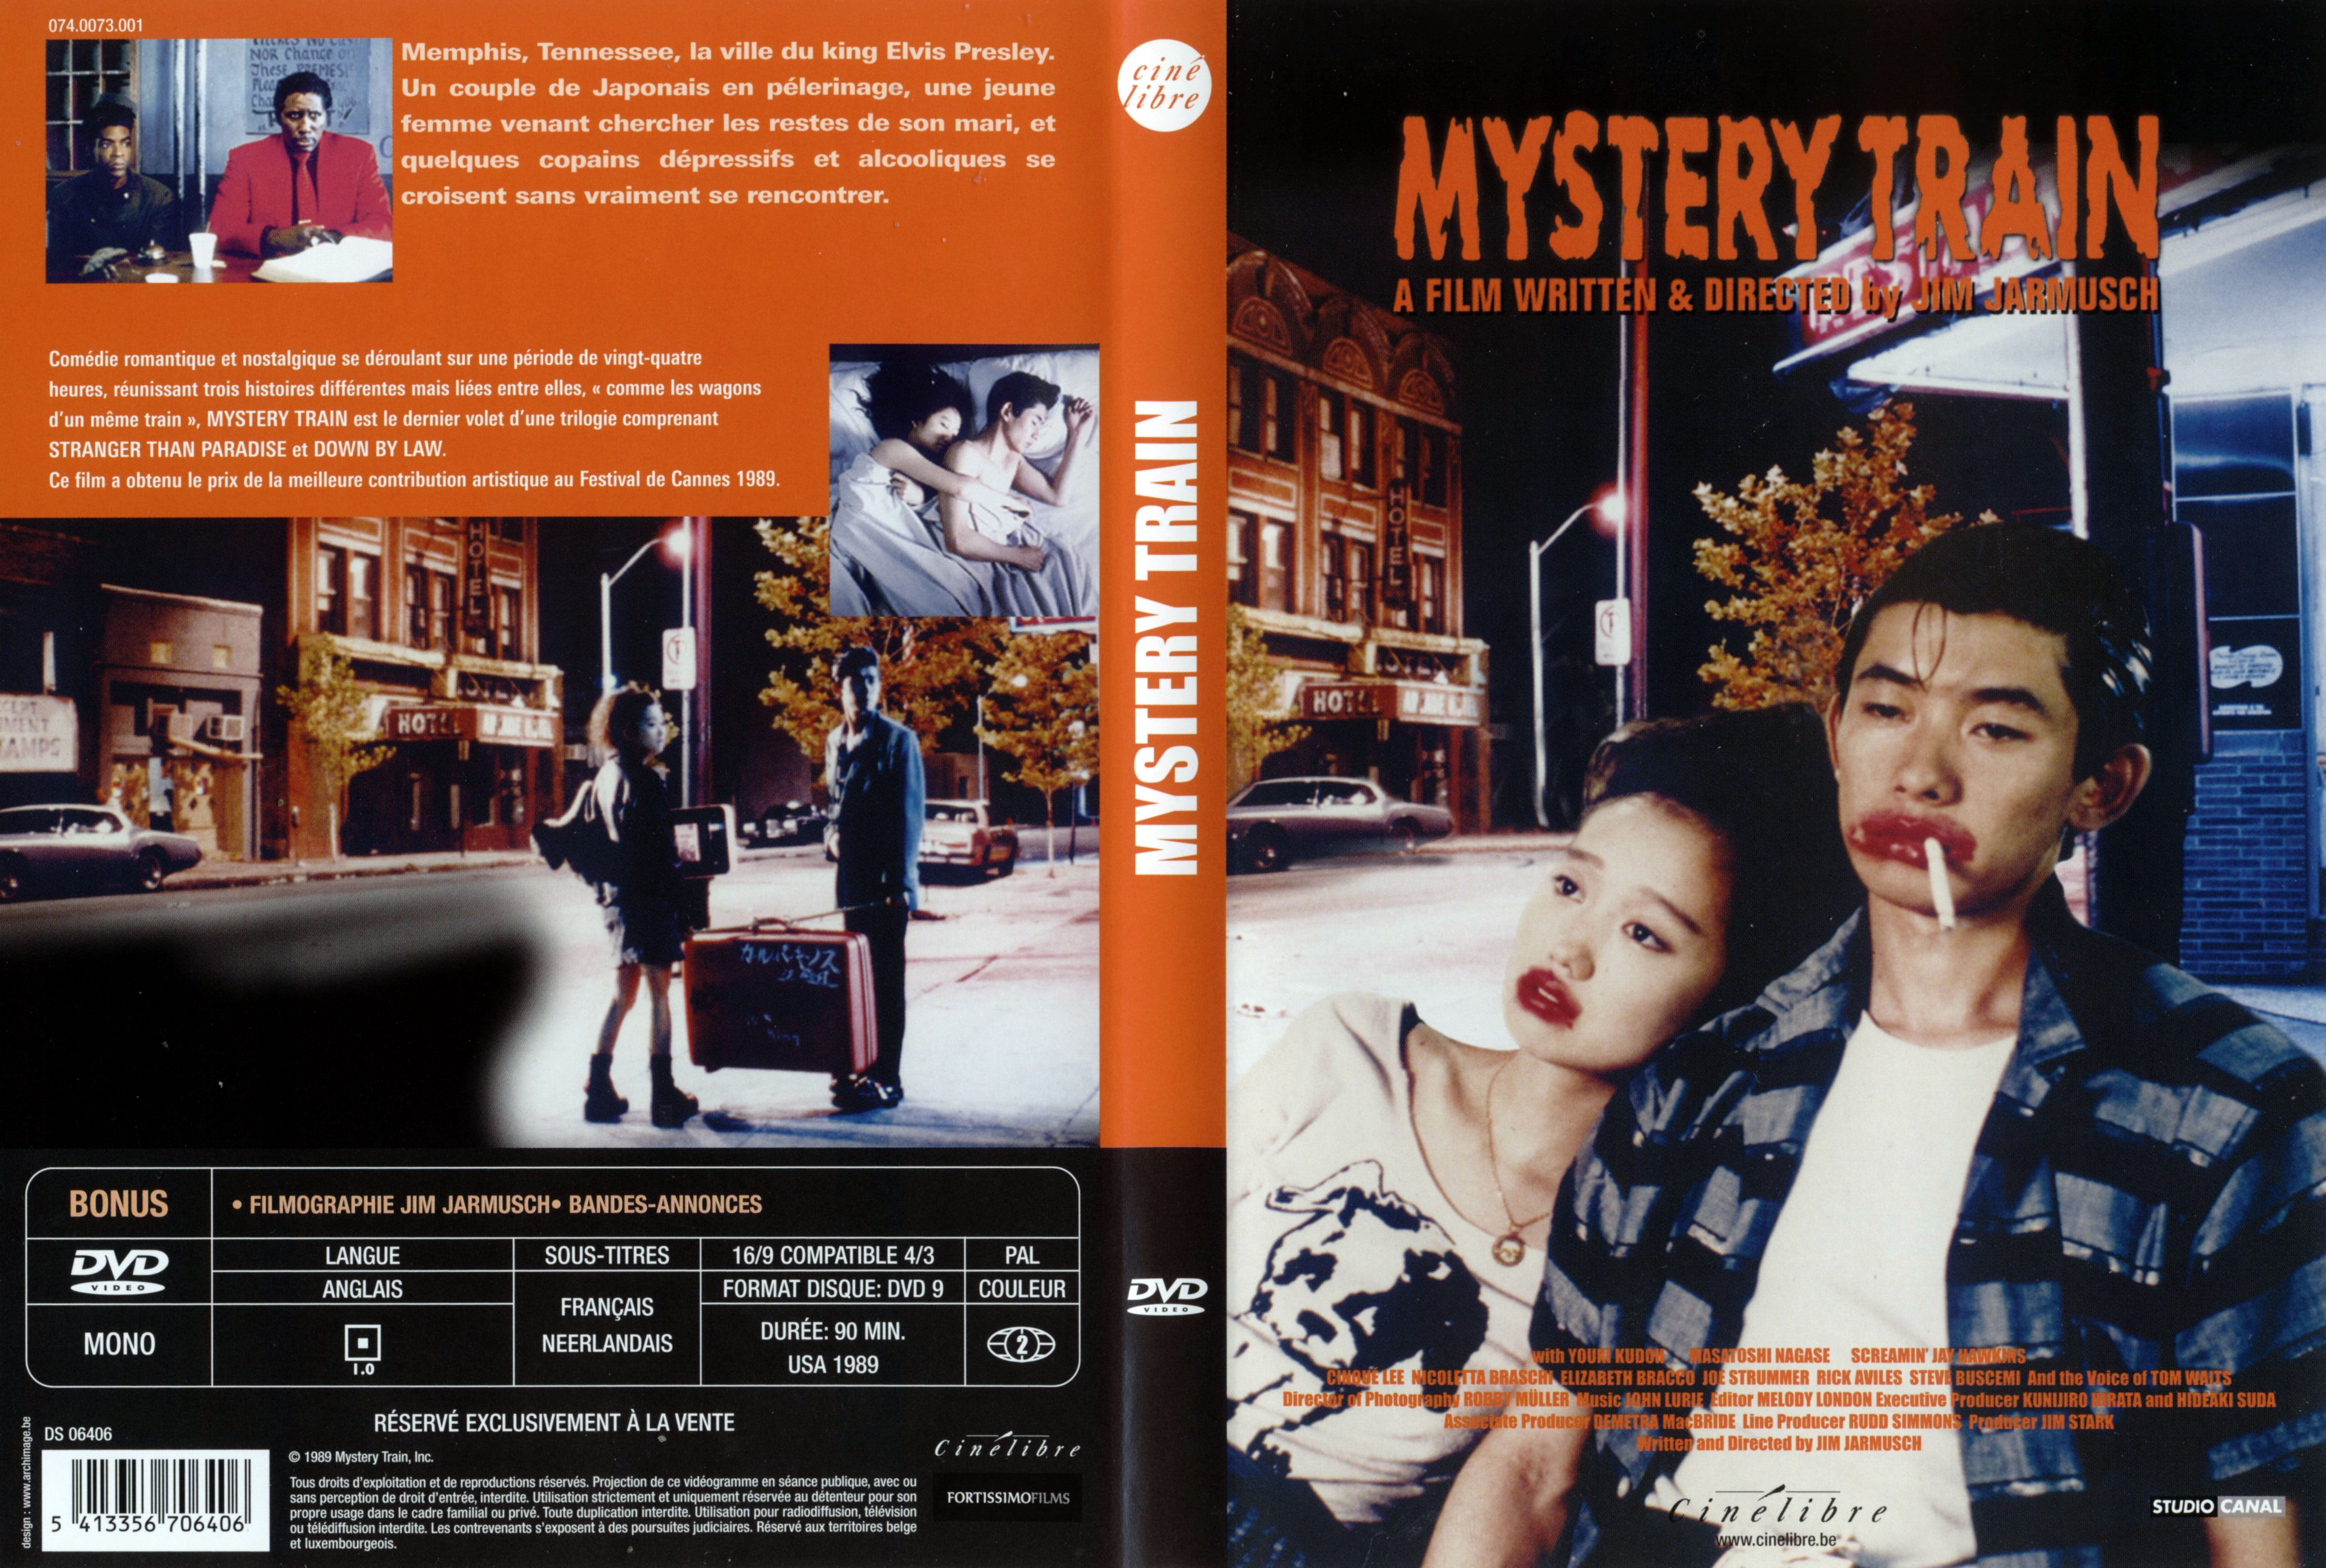 Jaquette DVD Mystery train